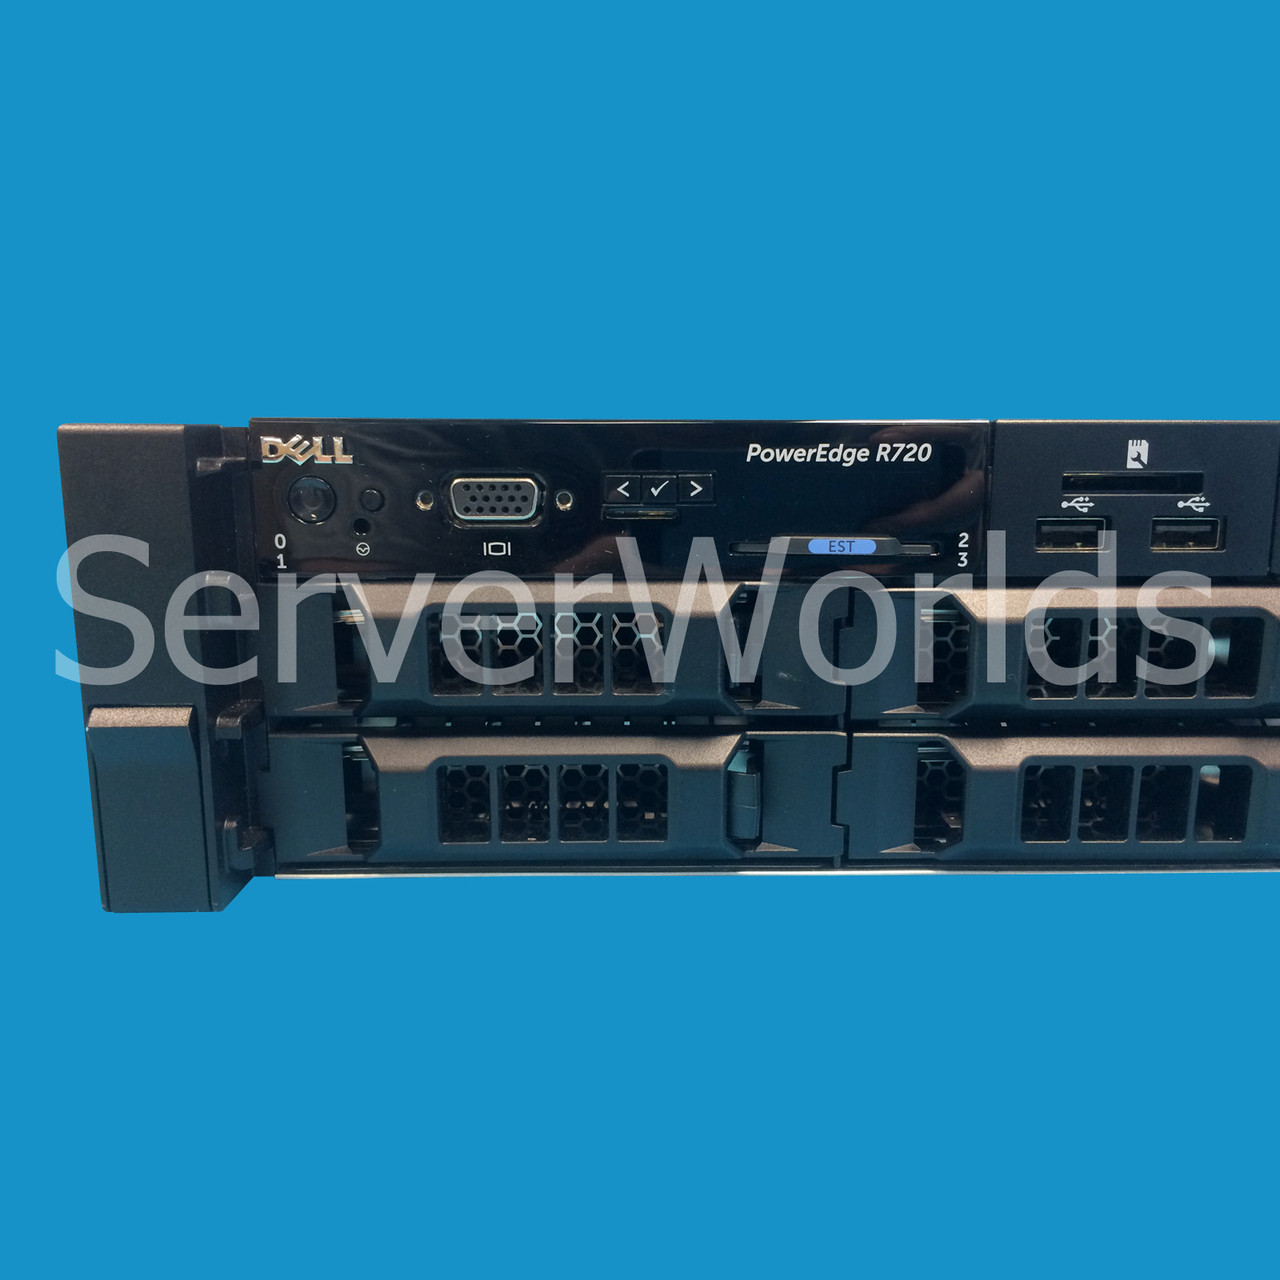 Refurbished Poweredge R720, Configured to Order, 8HDD 3.5" Front Ports